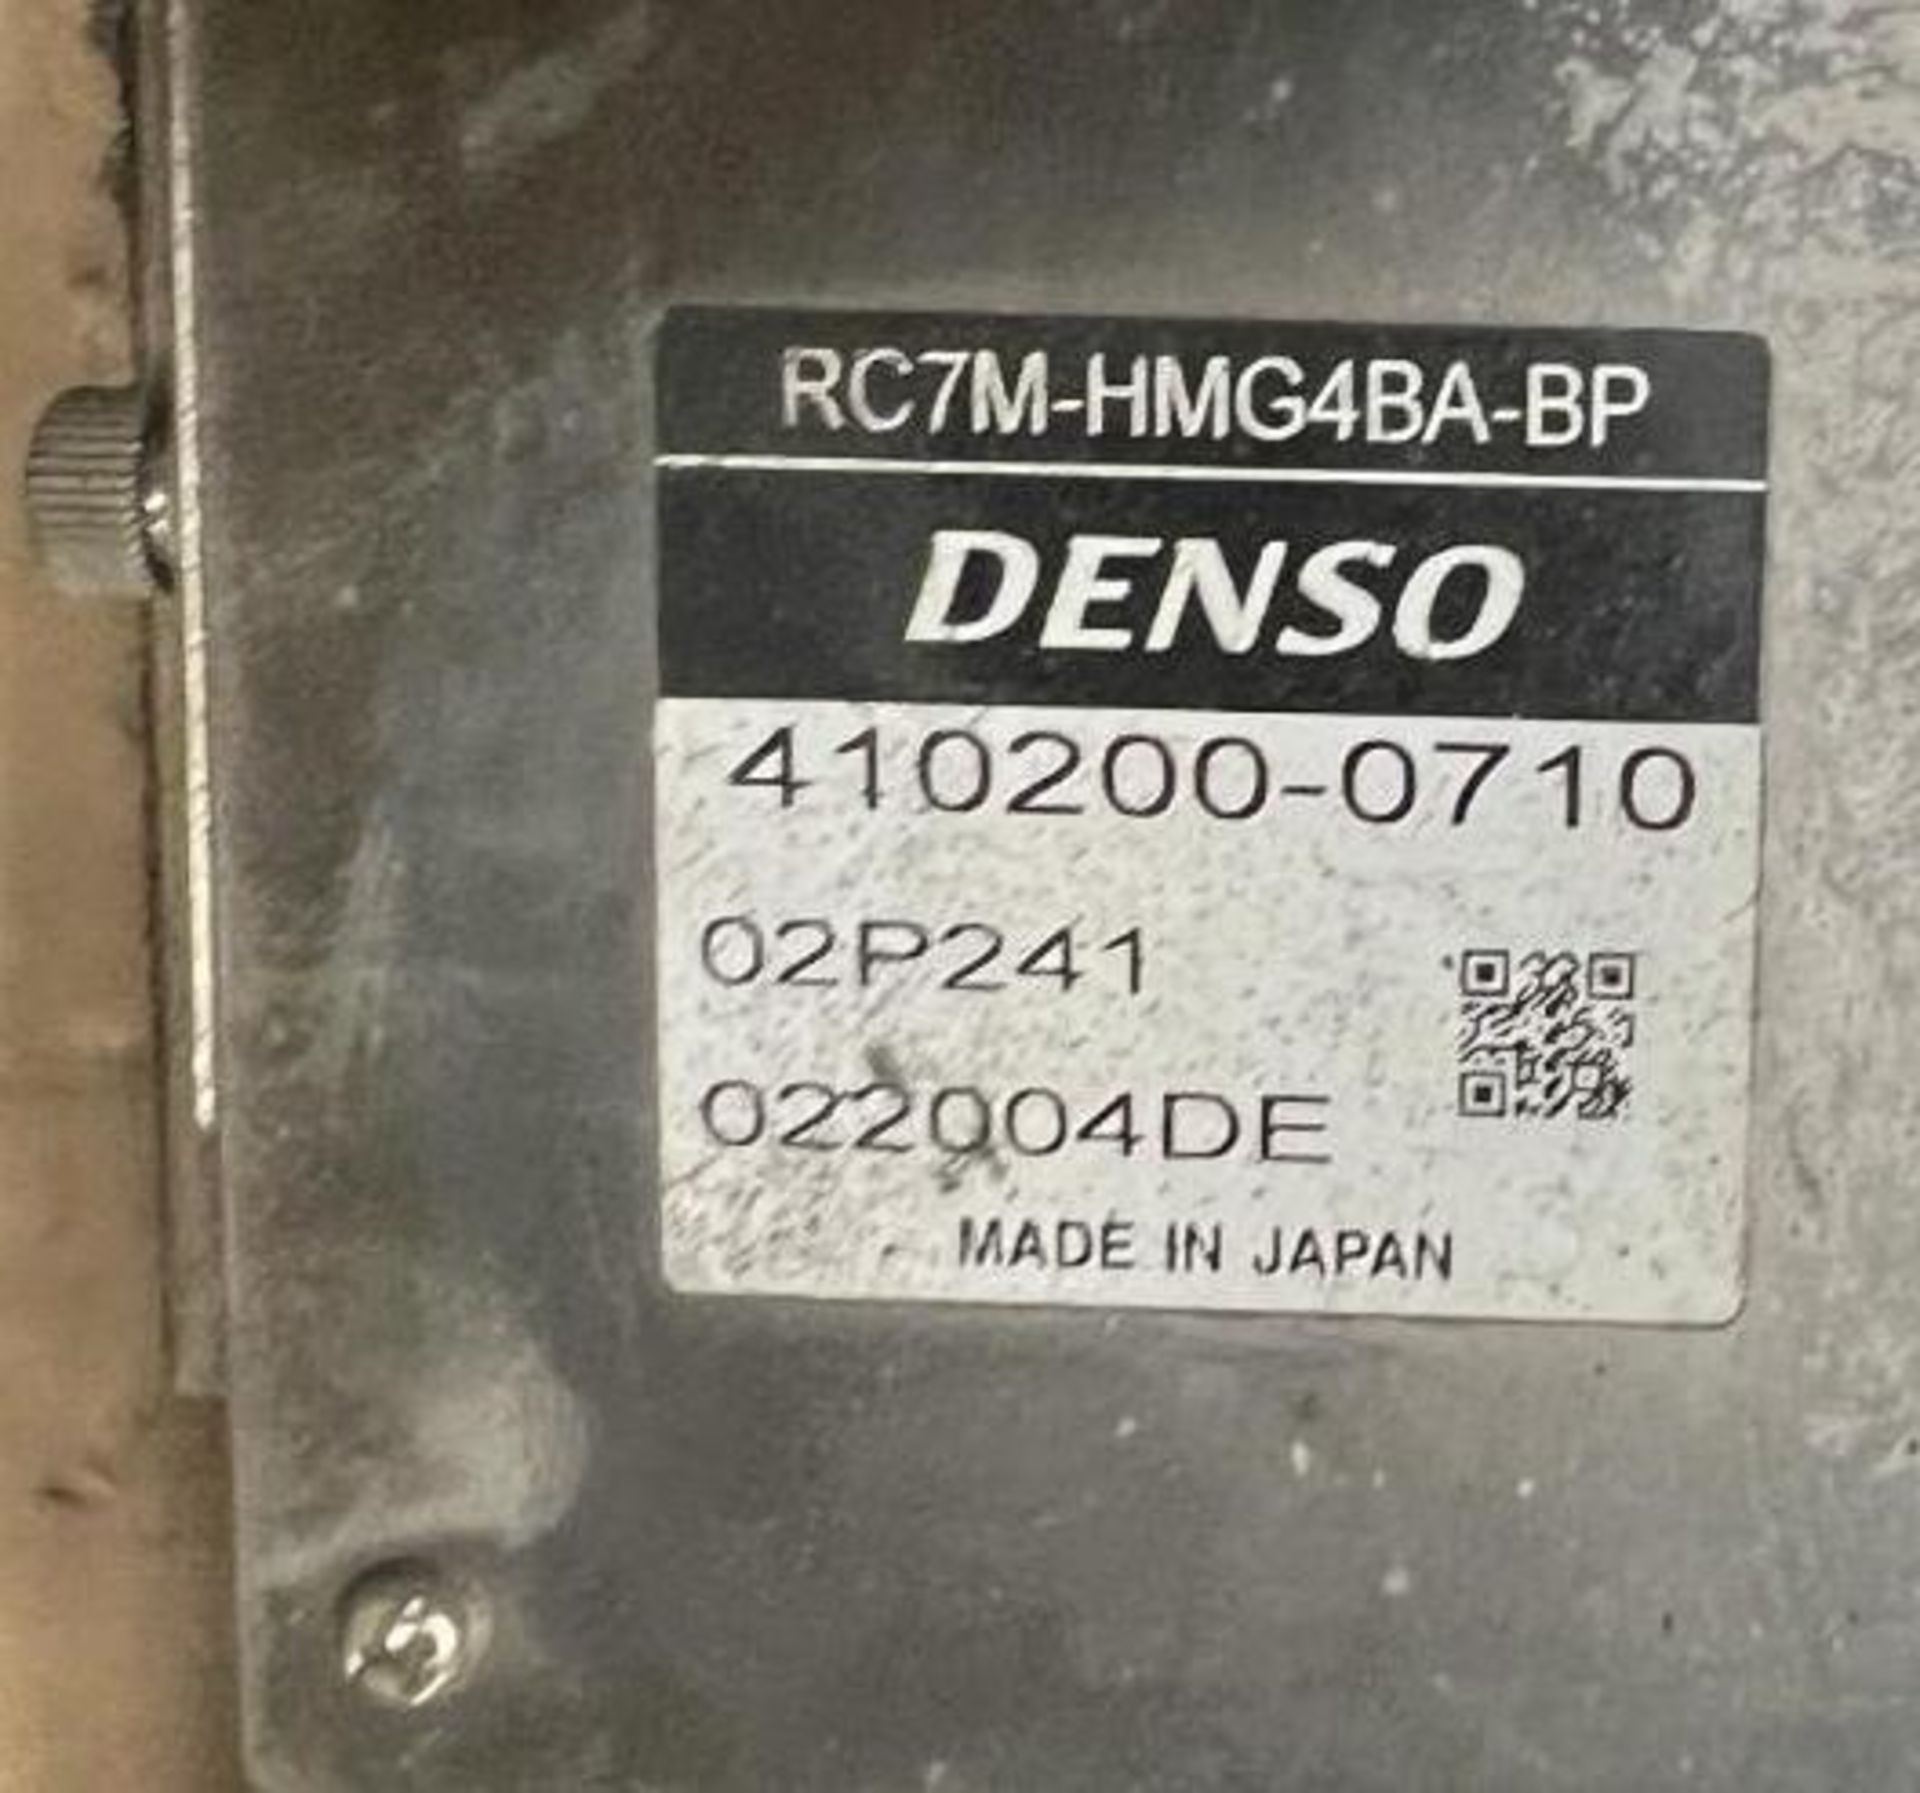 Lot of (4) Denso #RC7M-HMG4BA-BP / #410200-0710 Robot Controllers - Image 5 of 6